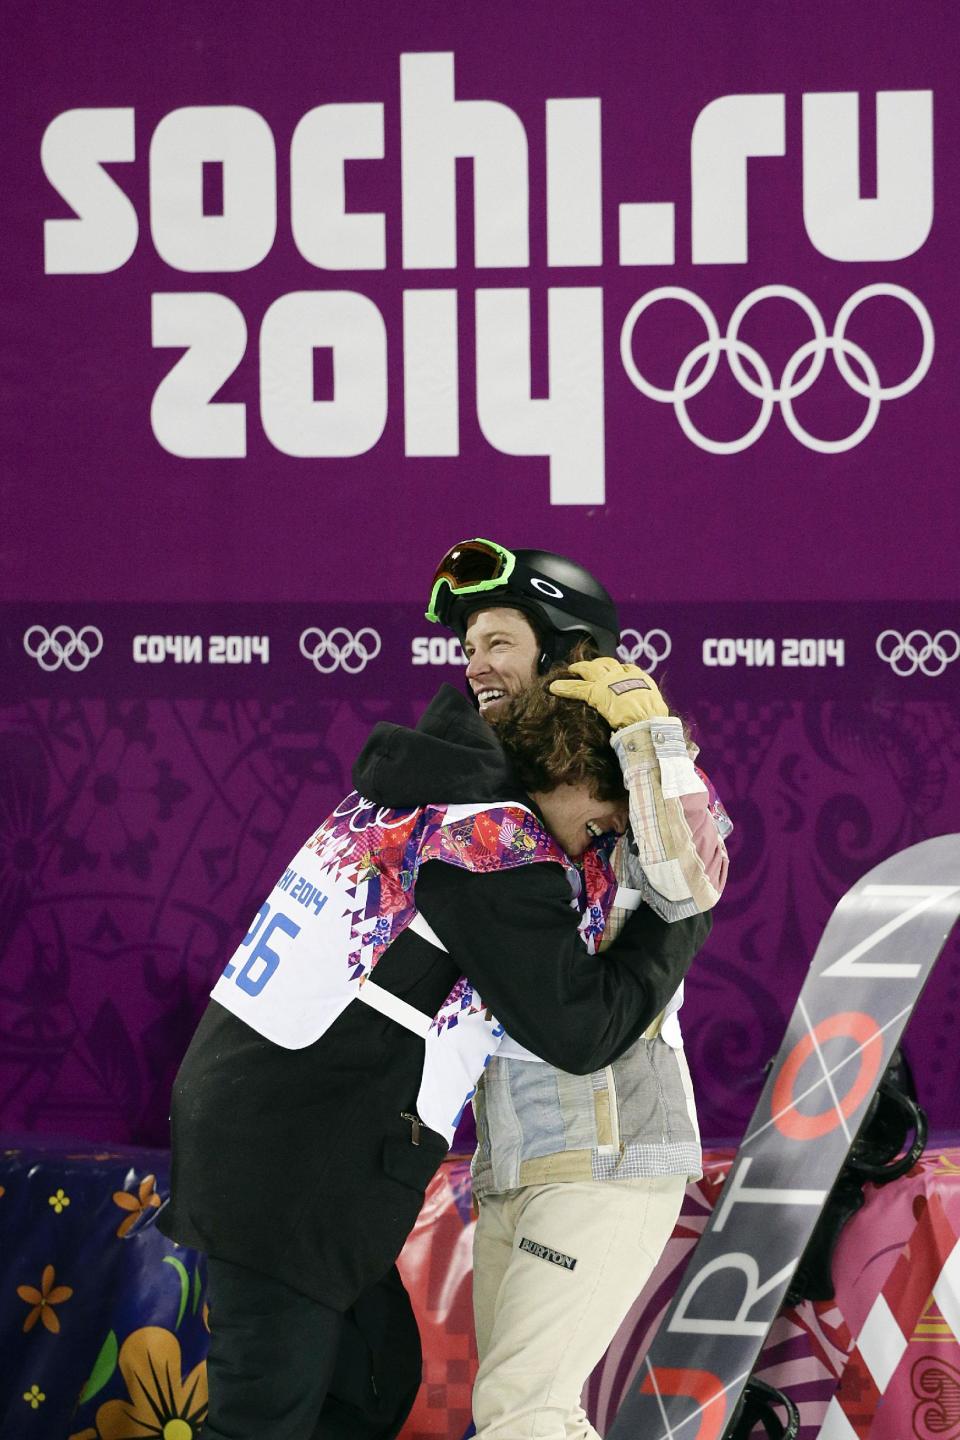 Switzerland's Iouri Podladtchikov, left, celebrates with Shaun White, of the United States, after Podladtchikov won the gold medal in the men's snowboard halfpipe final at the Rosa Khutor Extreme Park, at the 2014 Winter Olympics, Tuesday, Feb. 11, 2014, in Krasnaya Polyana, Russia. (AP Photo/Jae C. Hong, File)